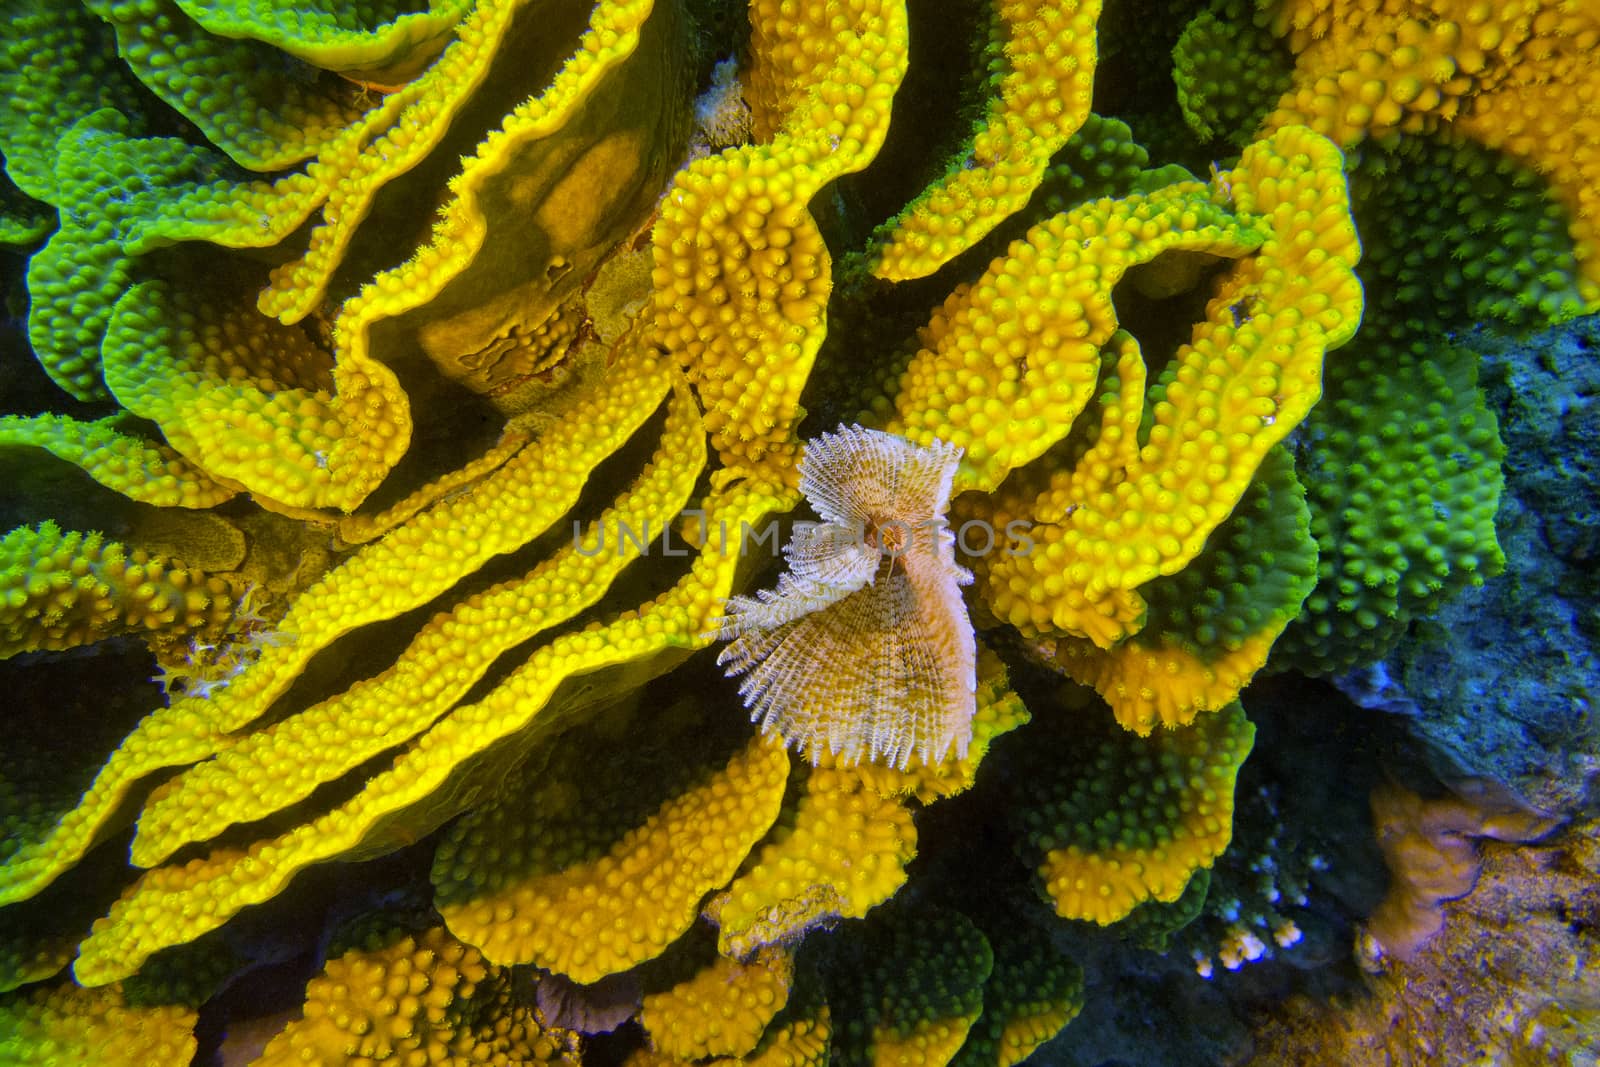 coral reef with yellow turbinaria mesenterina and fan worm at the bottom of tropical sea